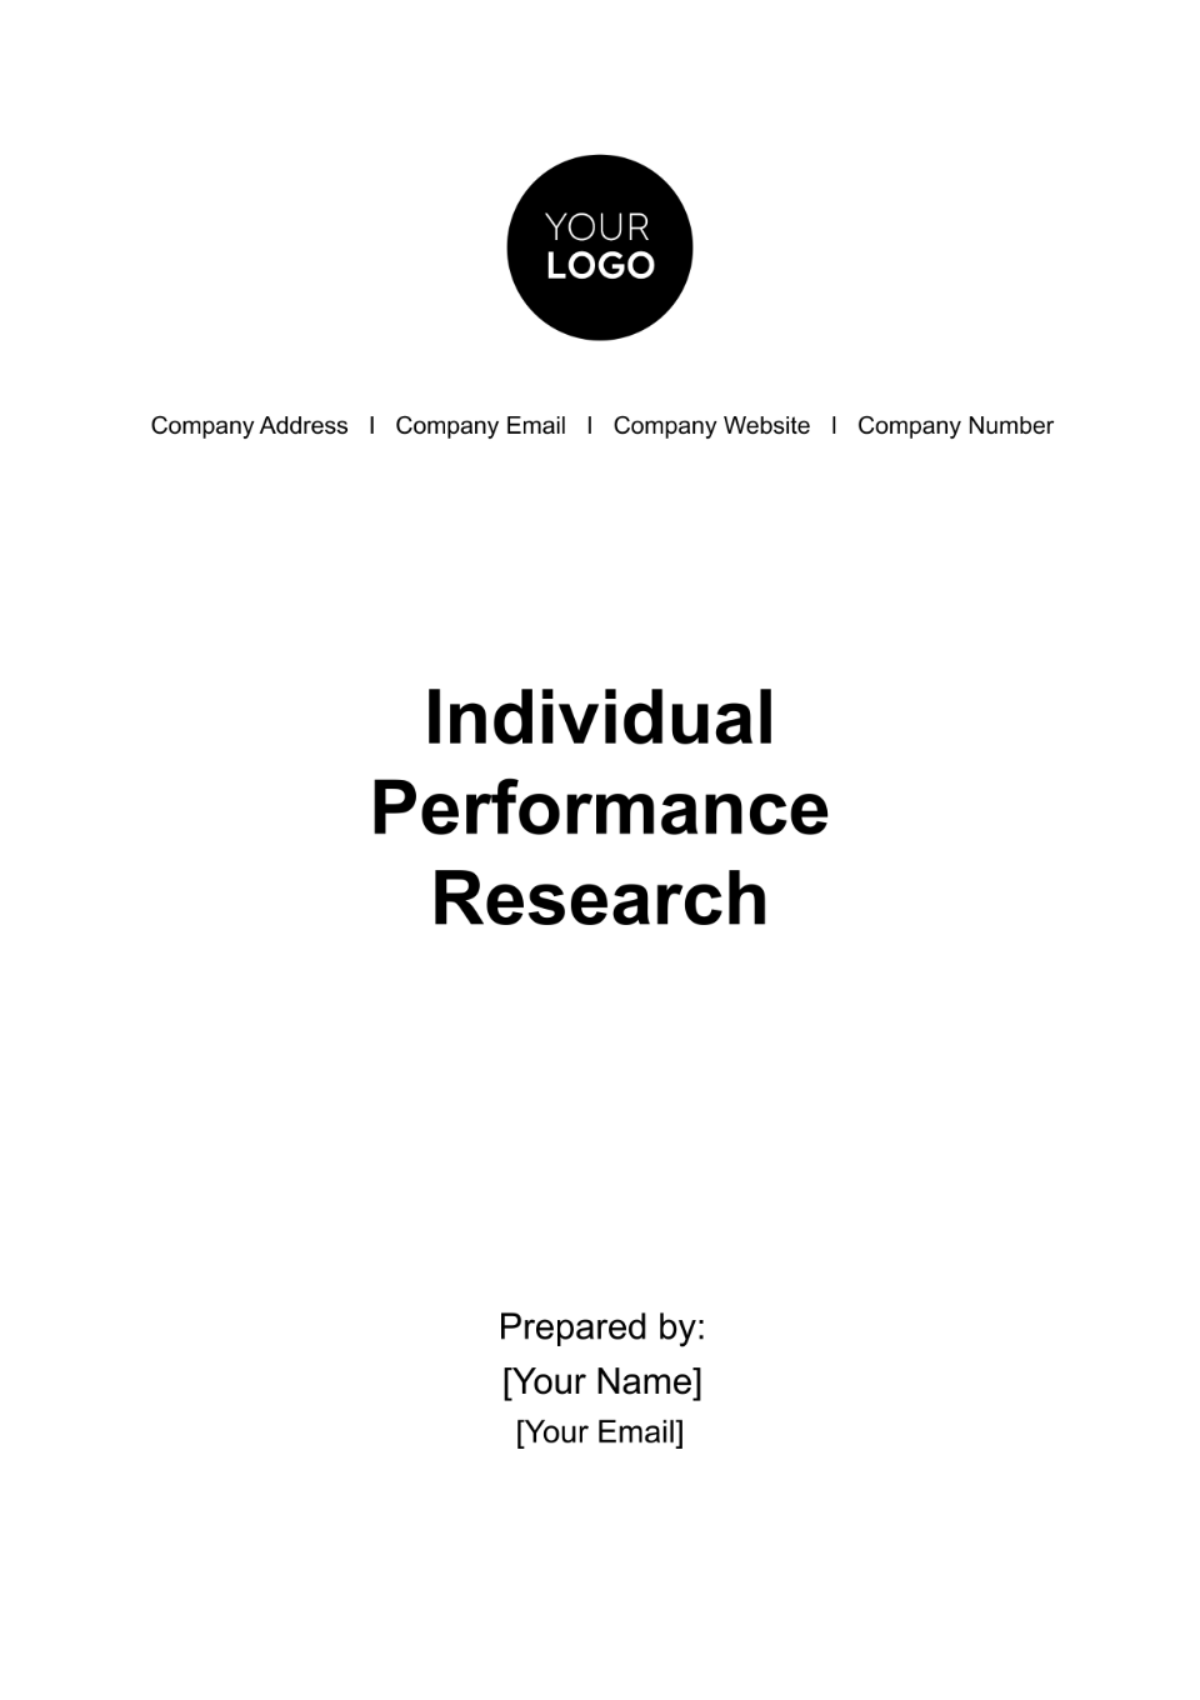 Free Individual Performance Research HR Template